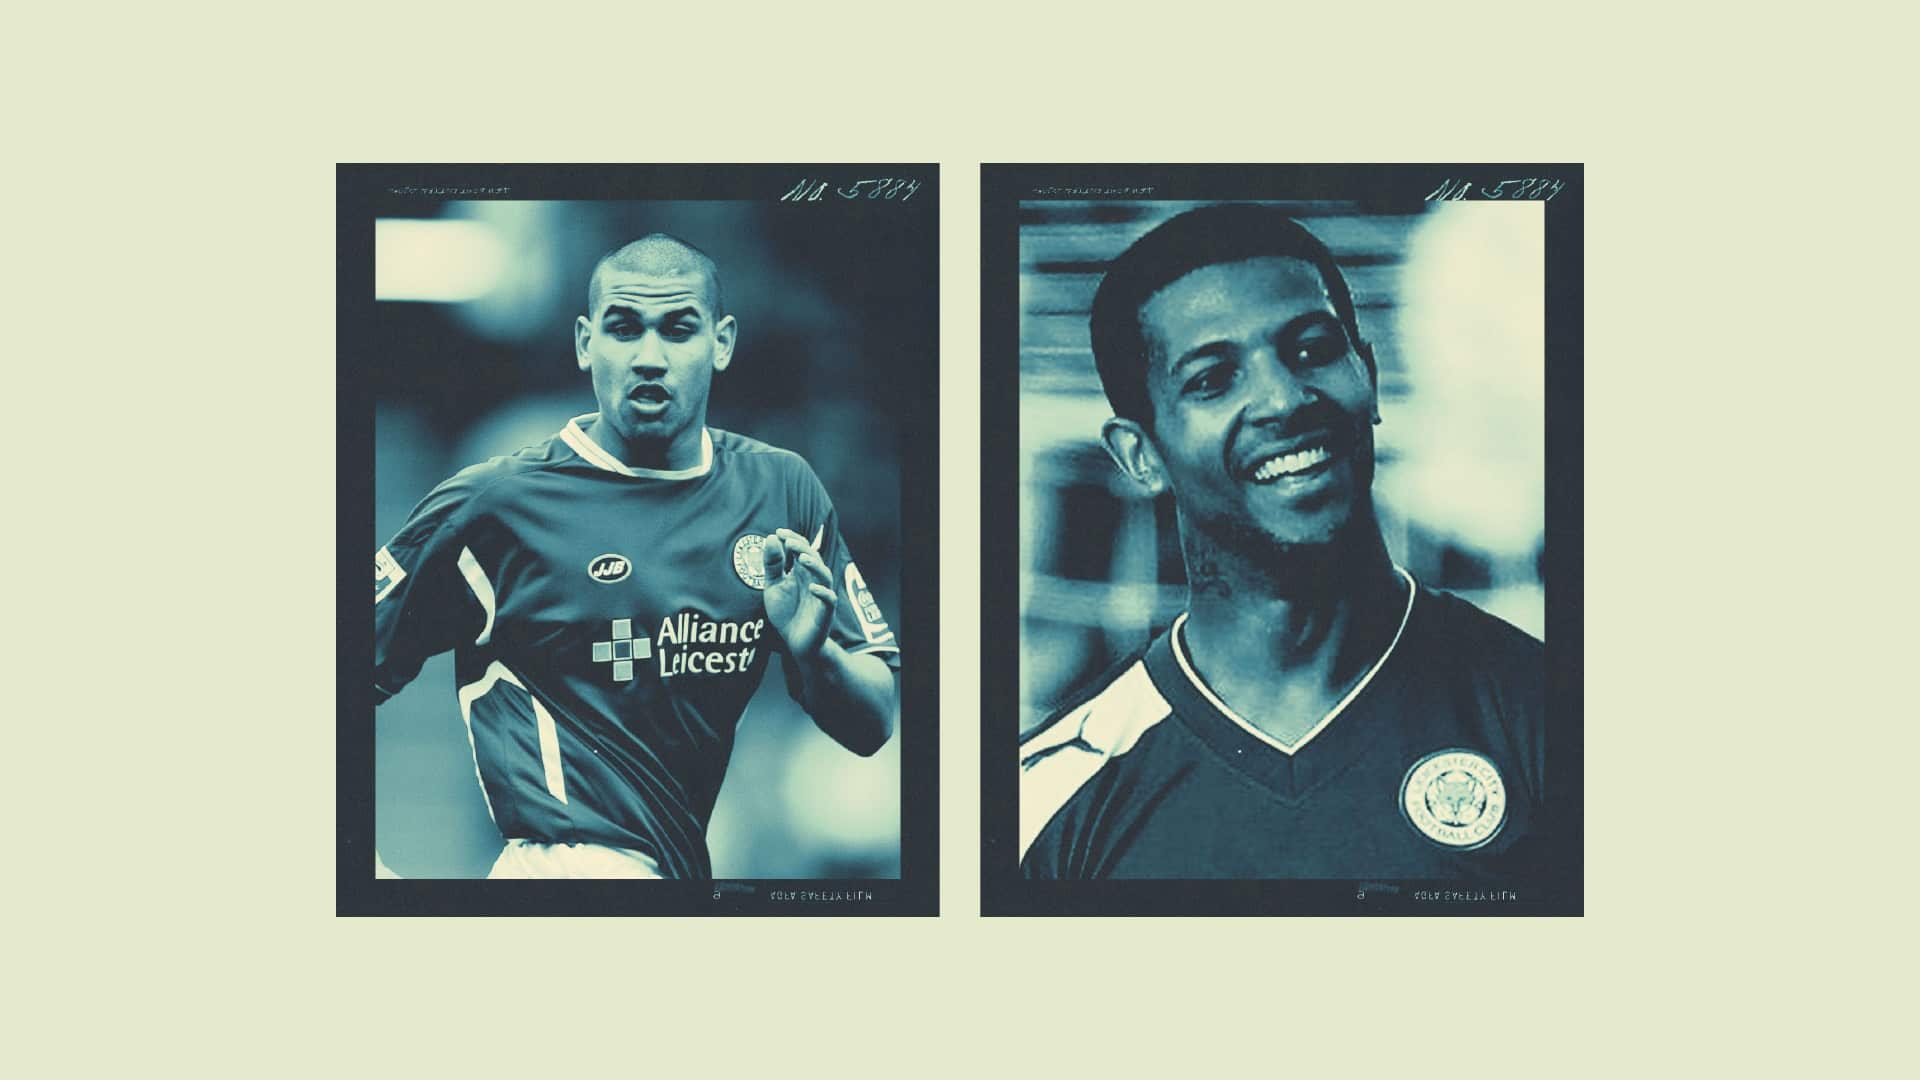 Paddy Kisnorbo and Jermaine Beckford, wearing Leicester shirts, which isn't right is it